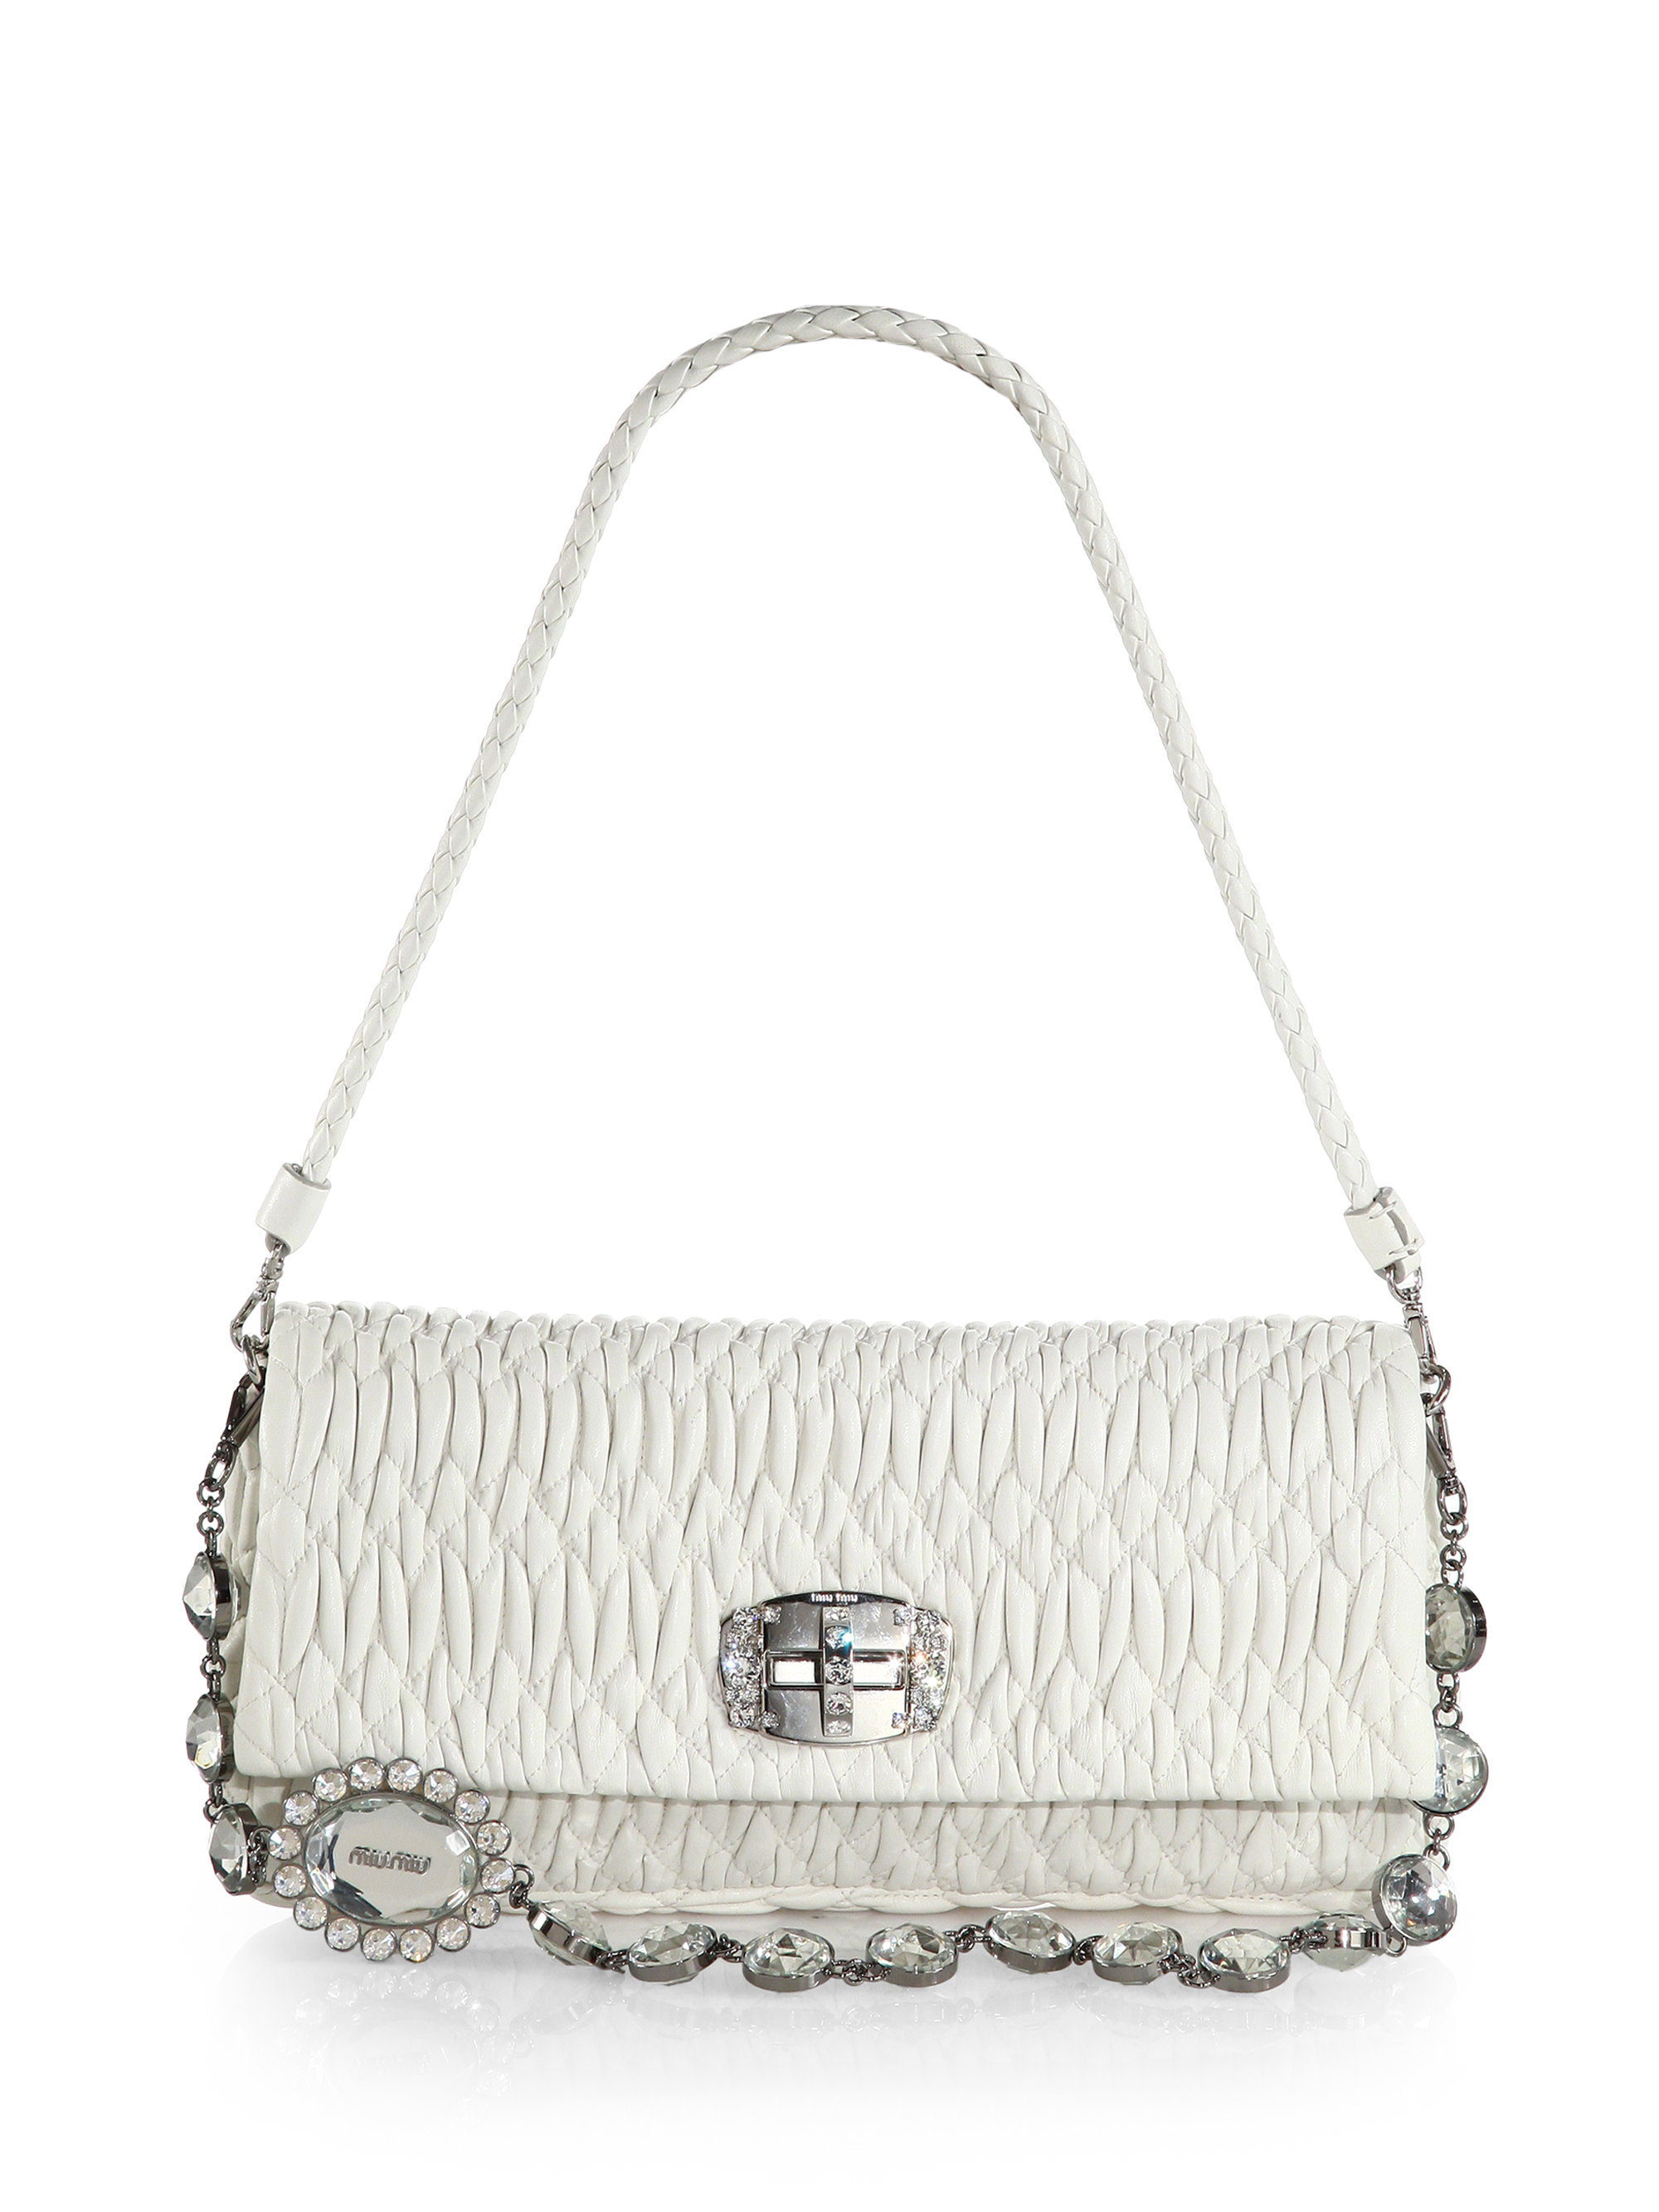 Miu miu Double-strap Pucker Leather Shoulder Bag in White | Lyst